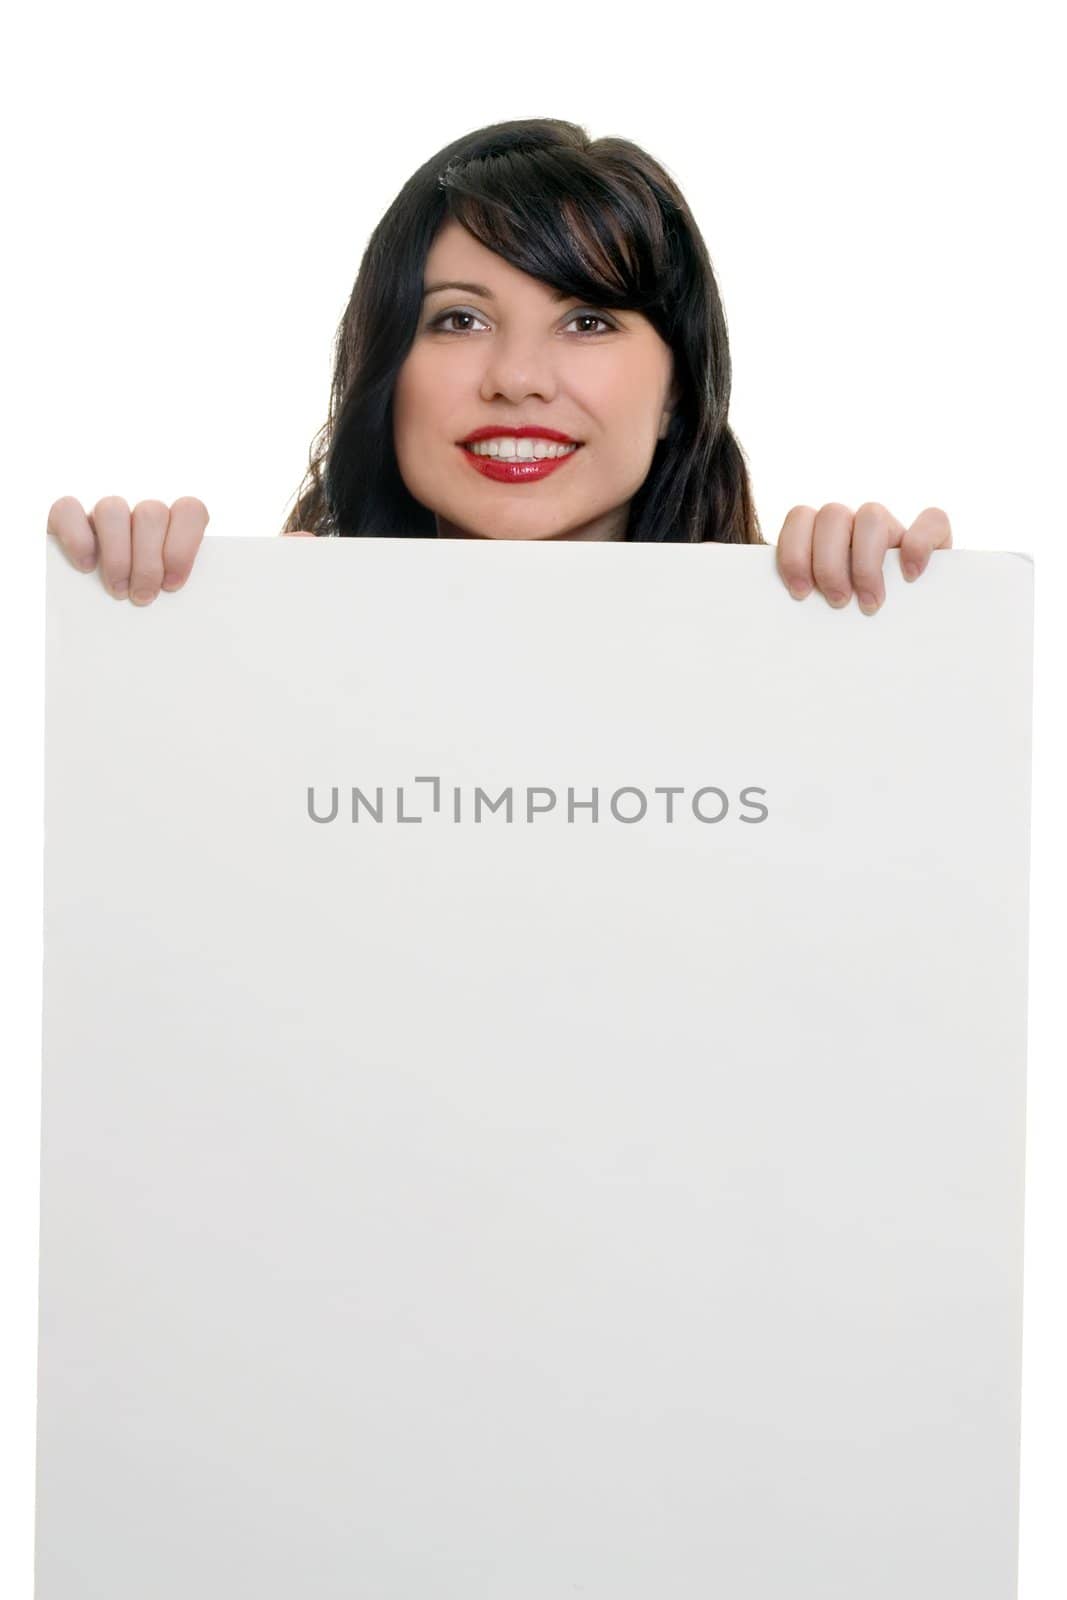 Friendly smiling woman holding blank white sign, ready for text or imagery.